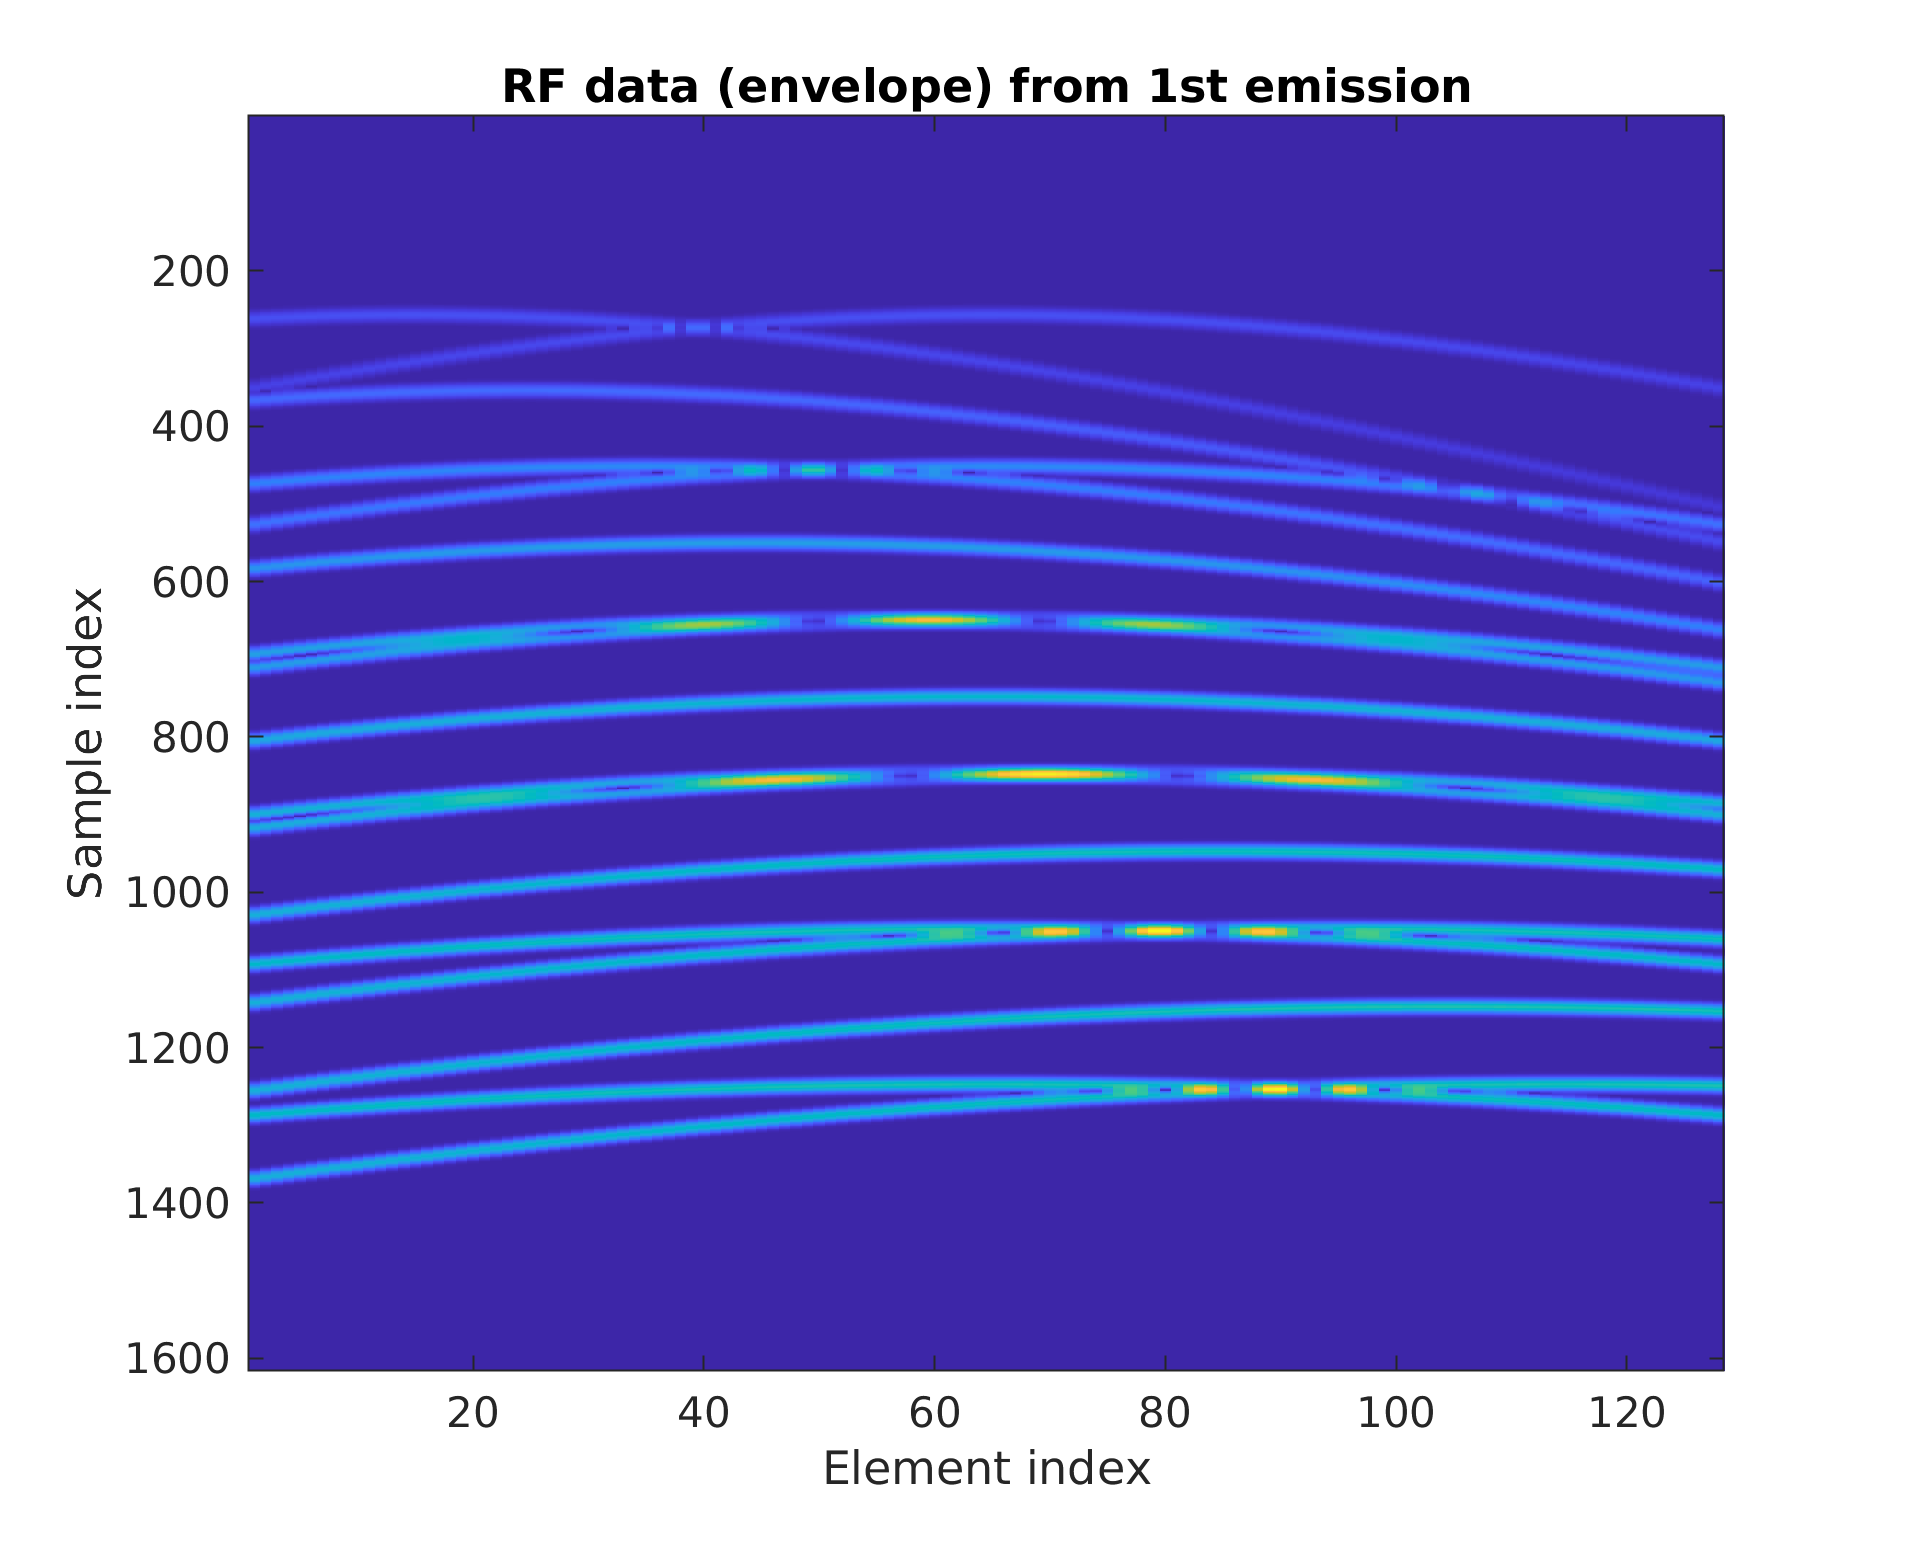 RF data from 1st emission.